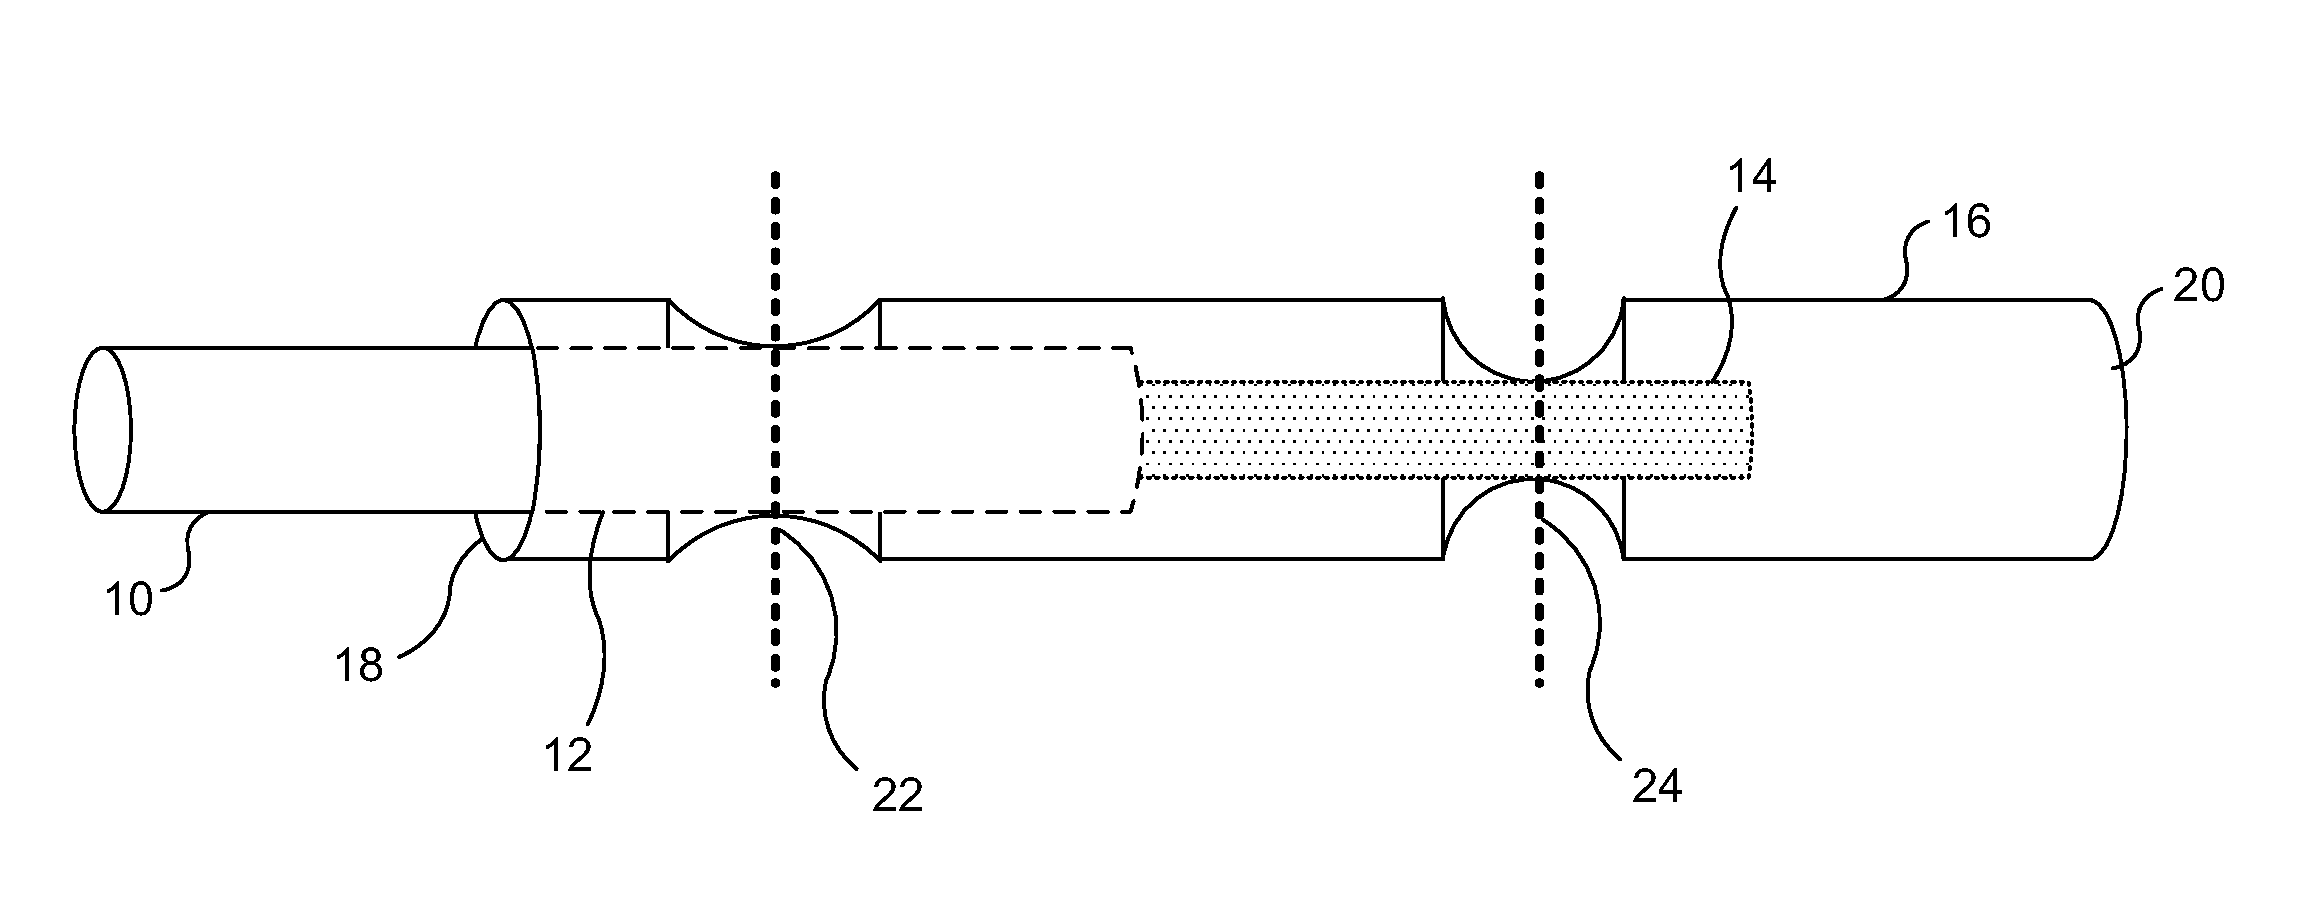 Medical lead termination sleeve for implantable medical devices